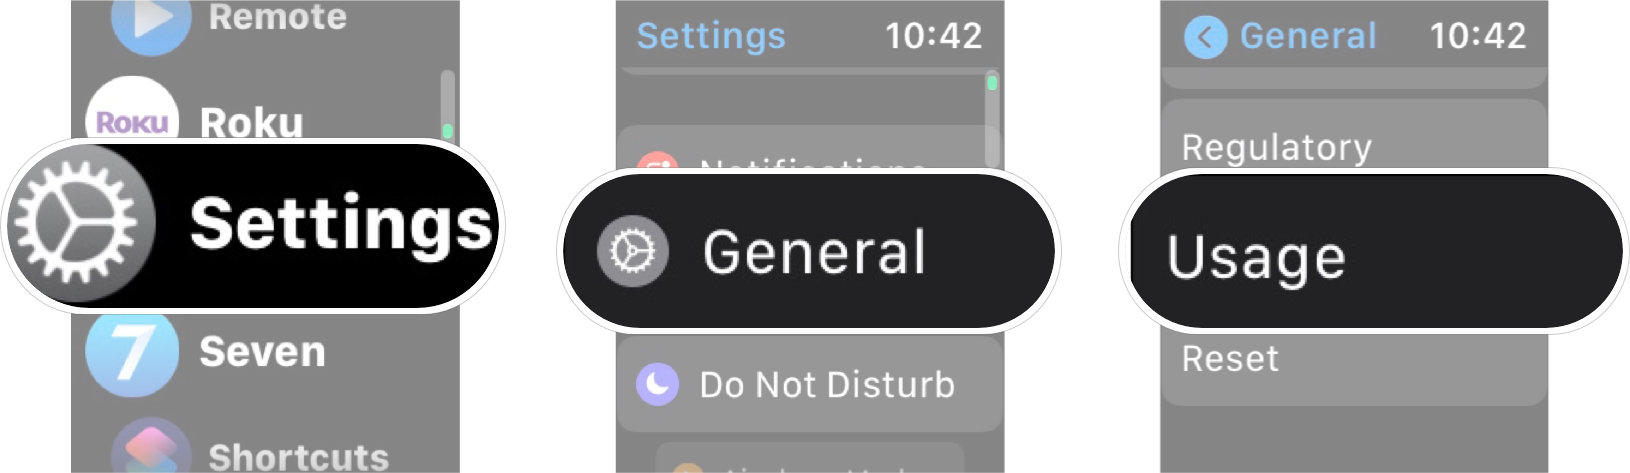 Storage Information On Apple Watch: Launch the settings app on your Apple Watch, tap general, and then tap usage. 